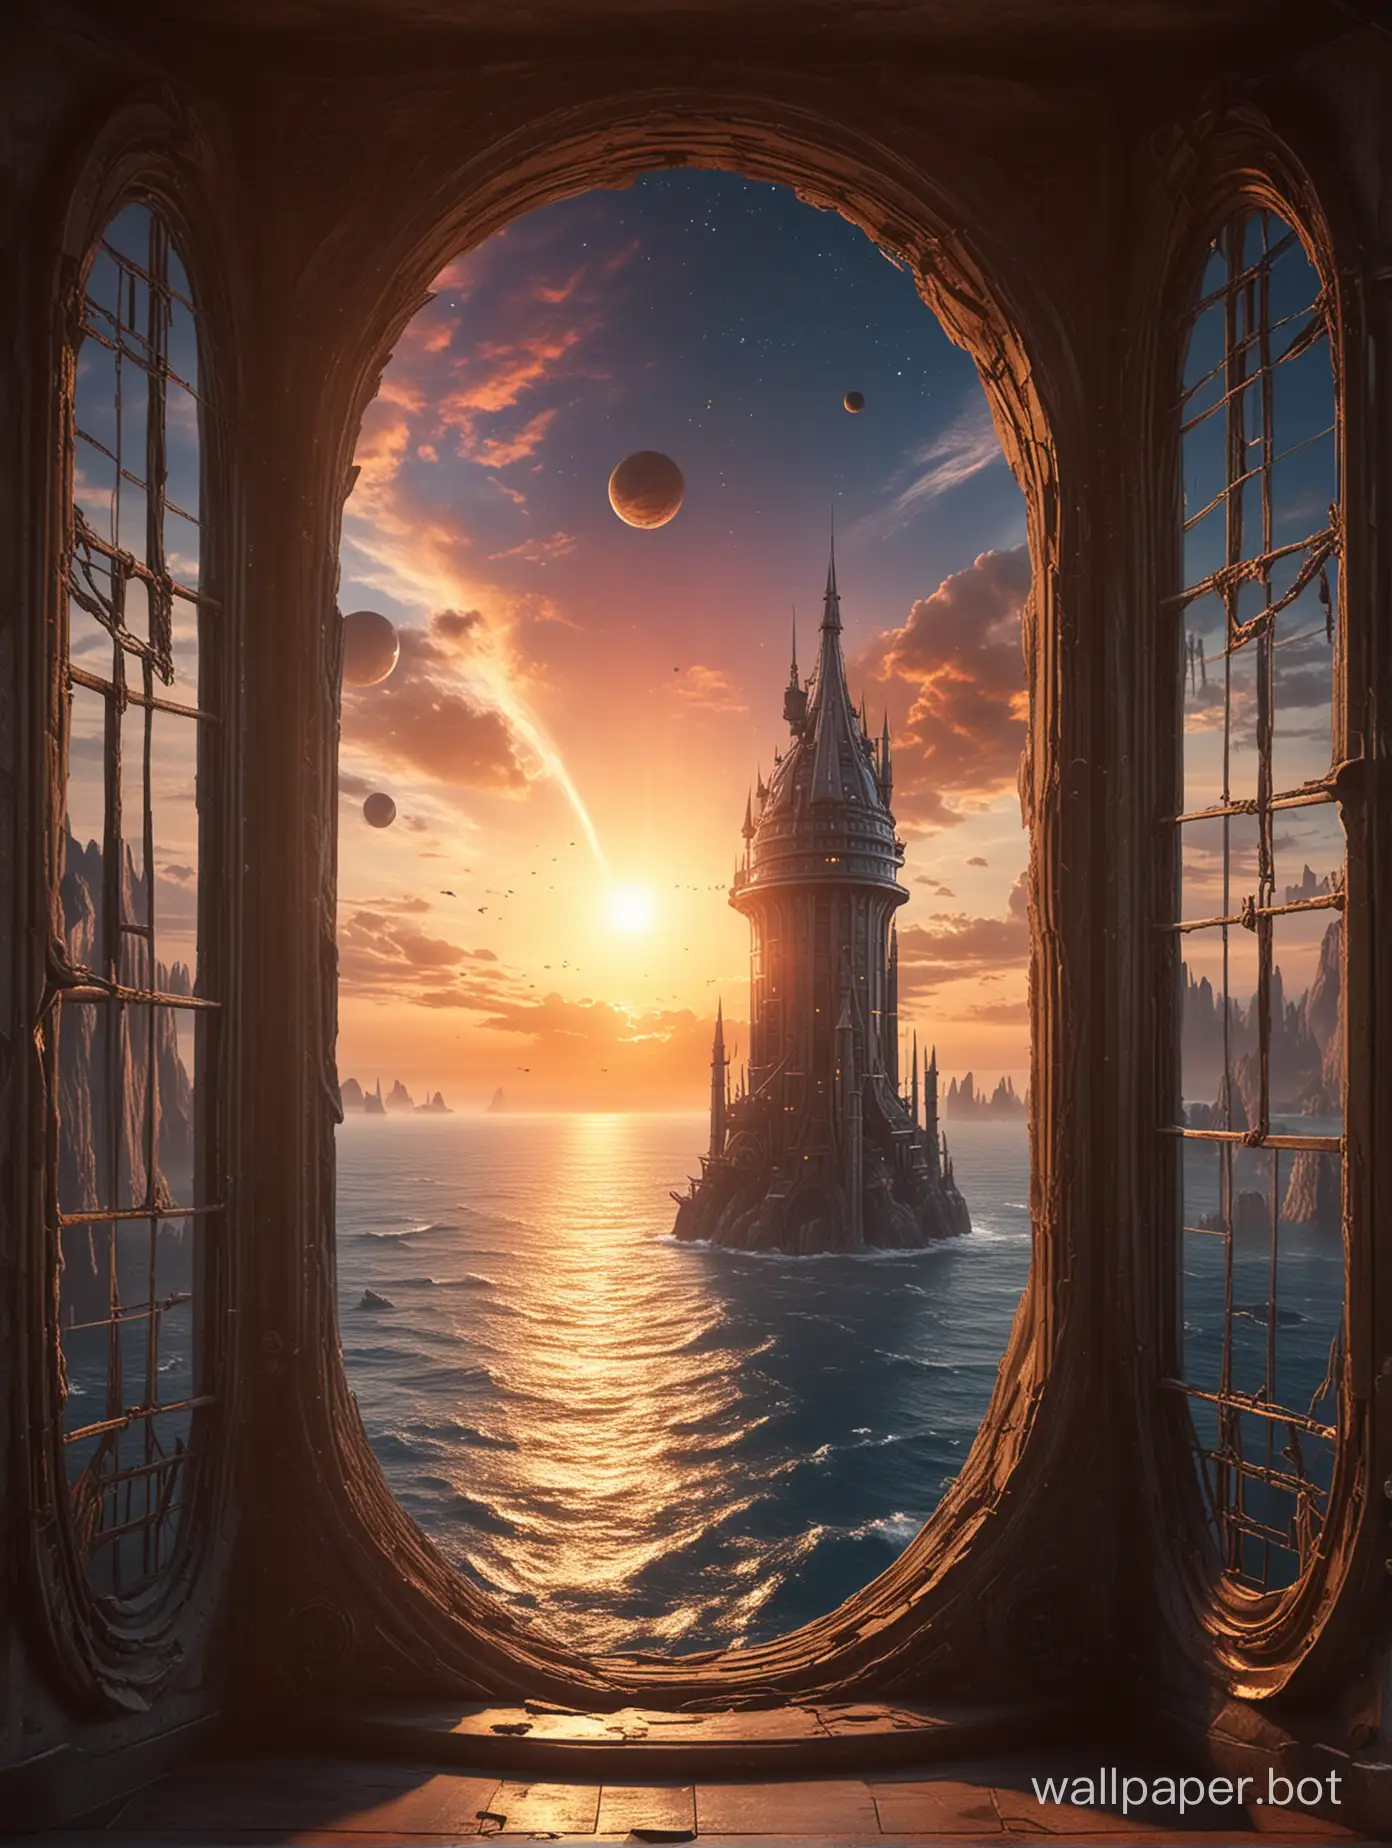 A narrow window into a fantastic space with a planet. fantastic tower against sunset background. There is an airship with sails in the sky. High resolution. Very definition.  sci-fi.